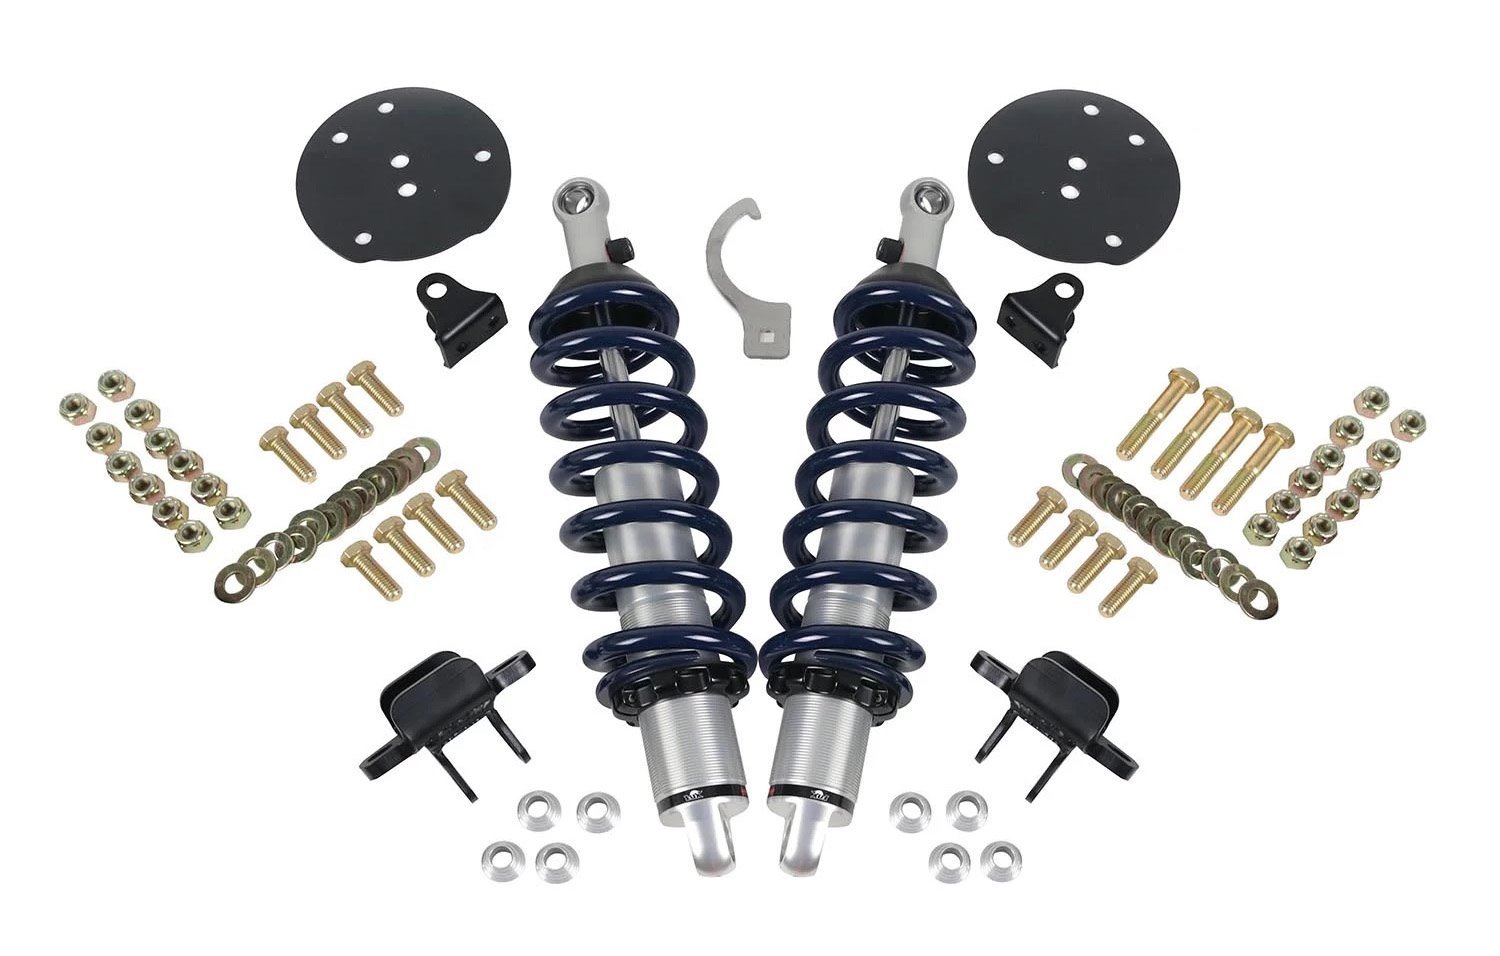 HQ Series Front Coil-Over Kit for Late-Model Ford F-150 4WD Trucks